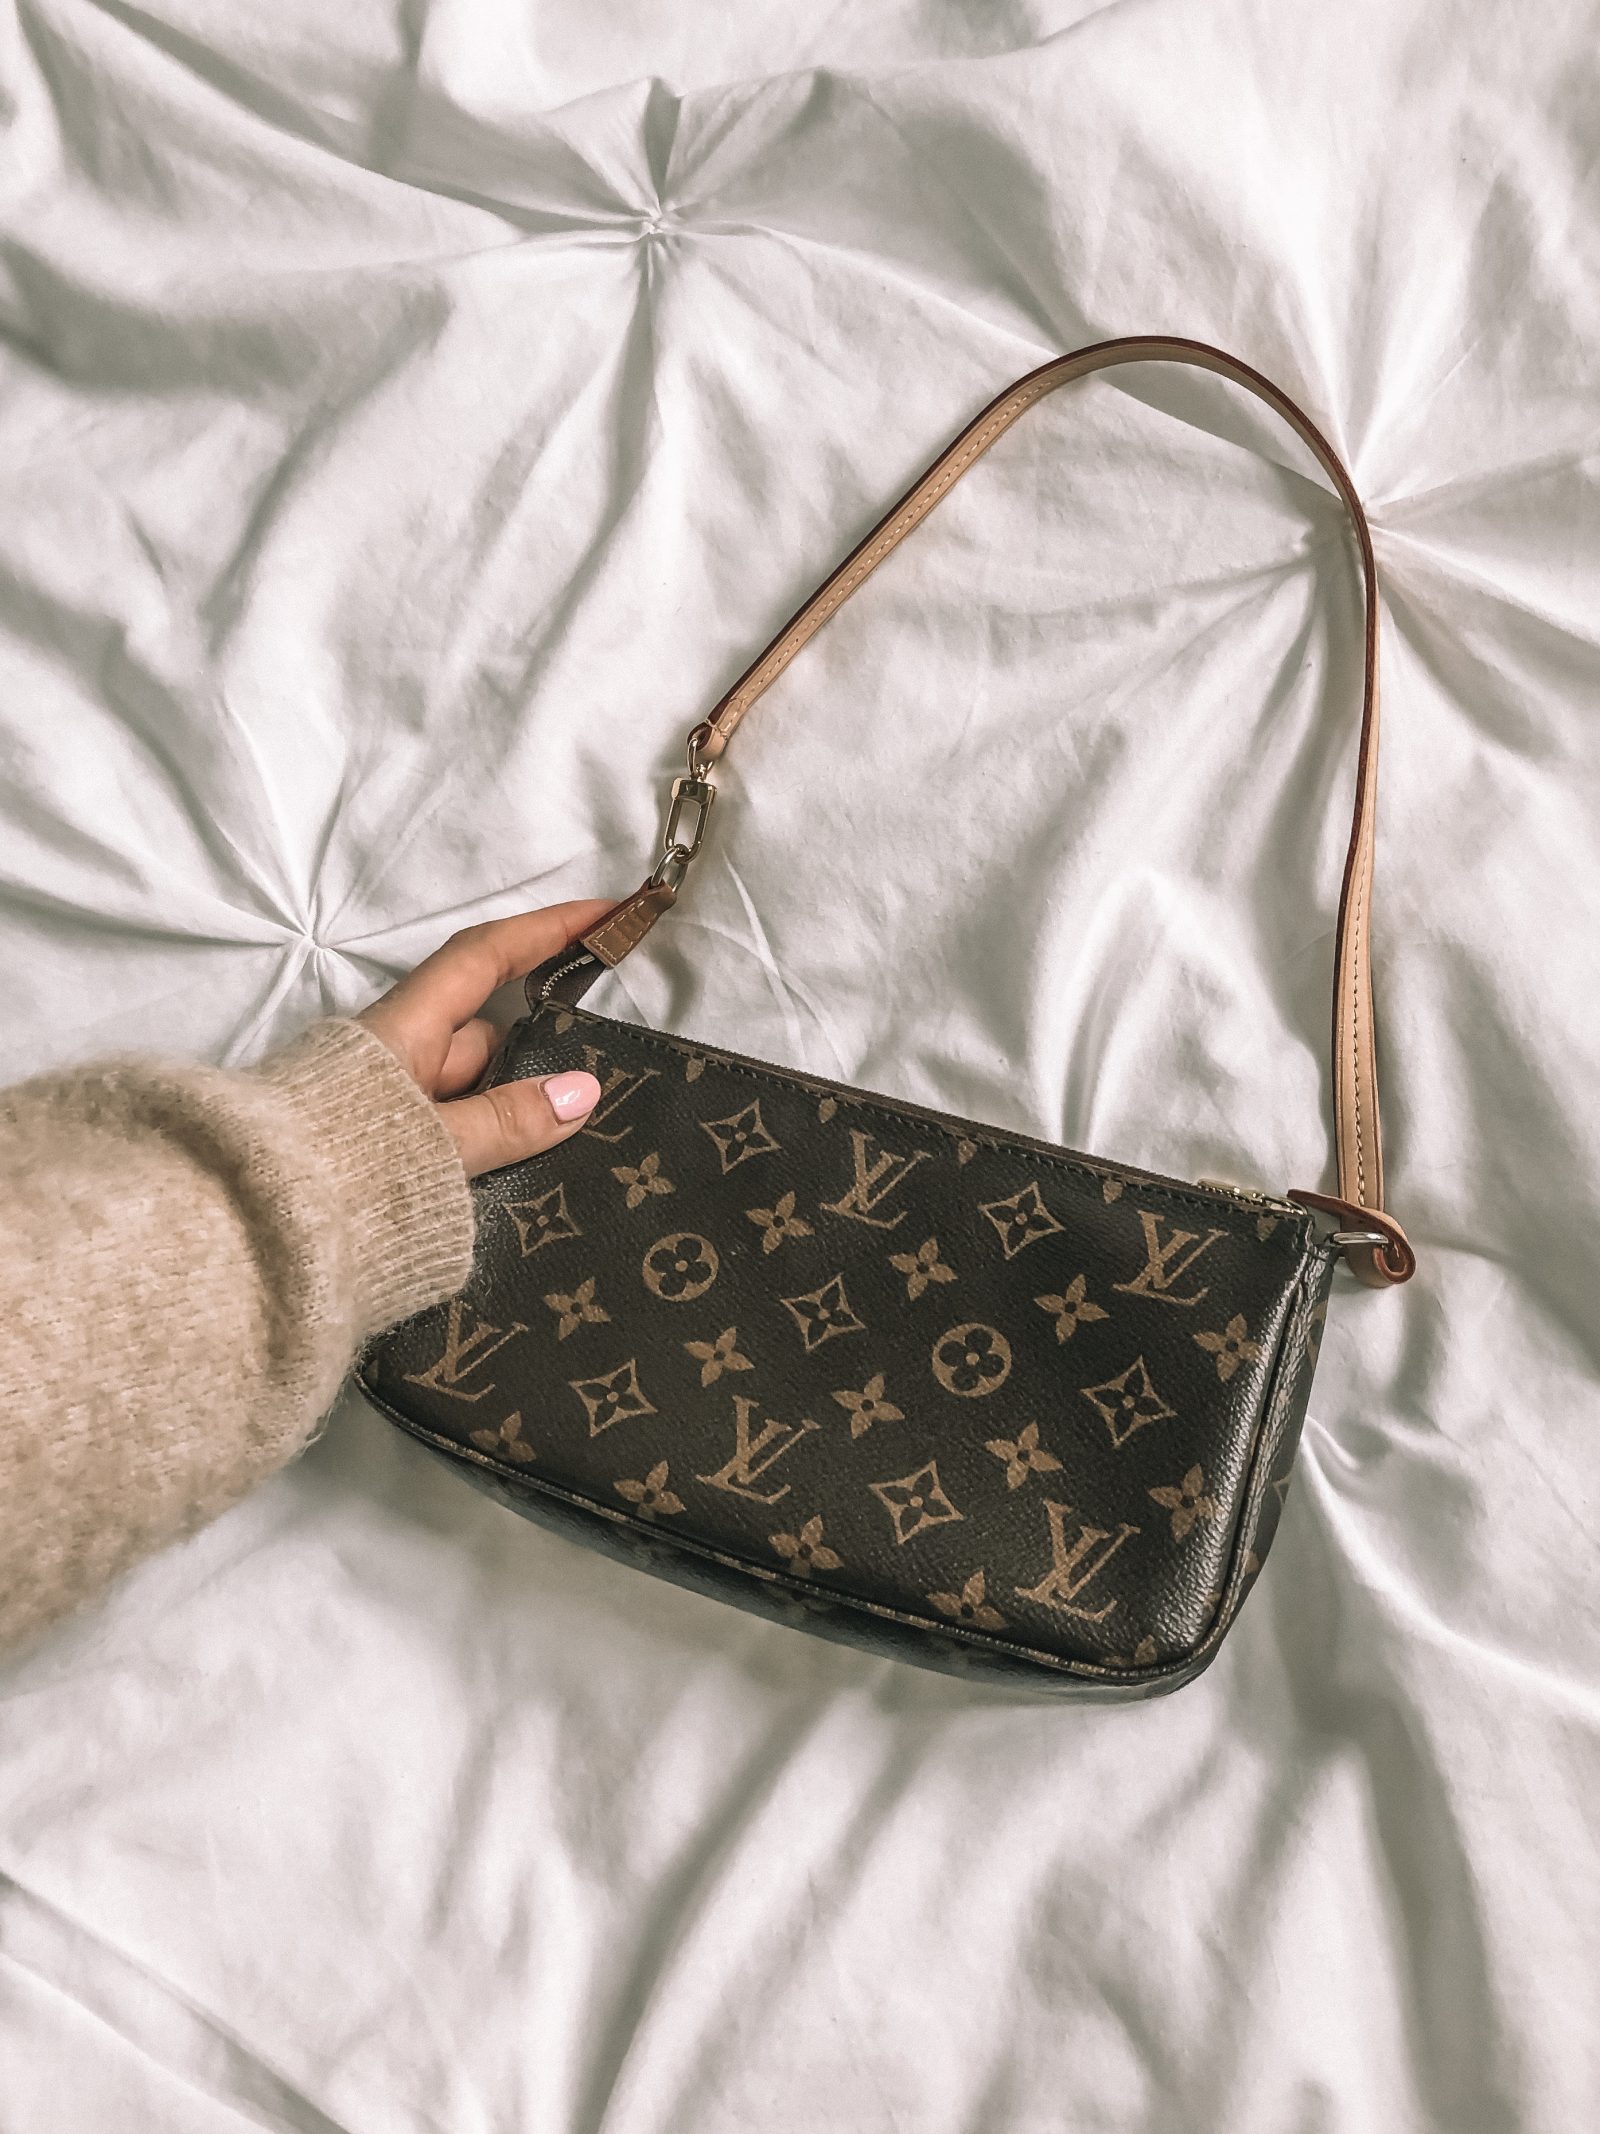 9 Of The Best : 90s Handbag | Love Style Mindfulness - Fashion & Personal Style Blog